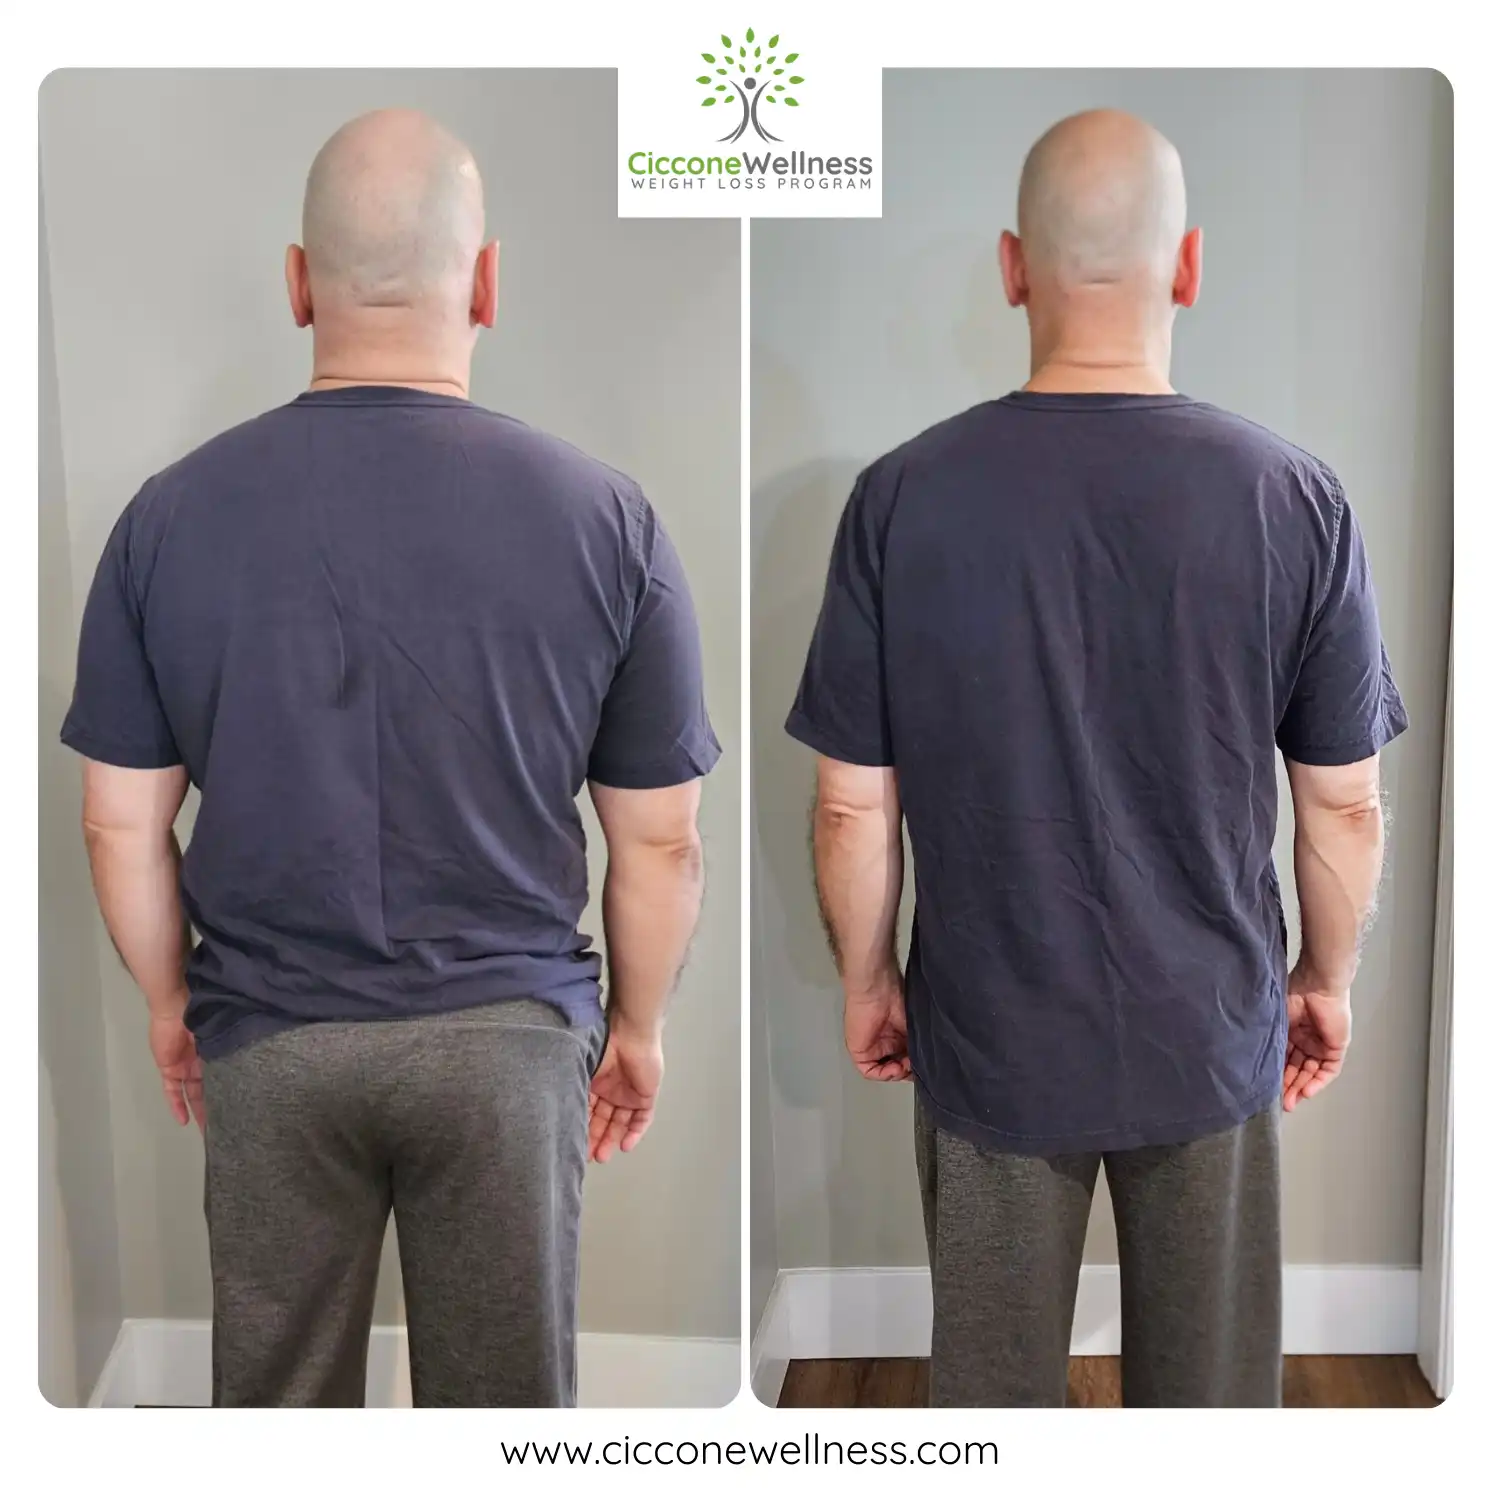 Rafael before and after weight loss back view